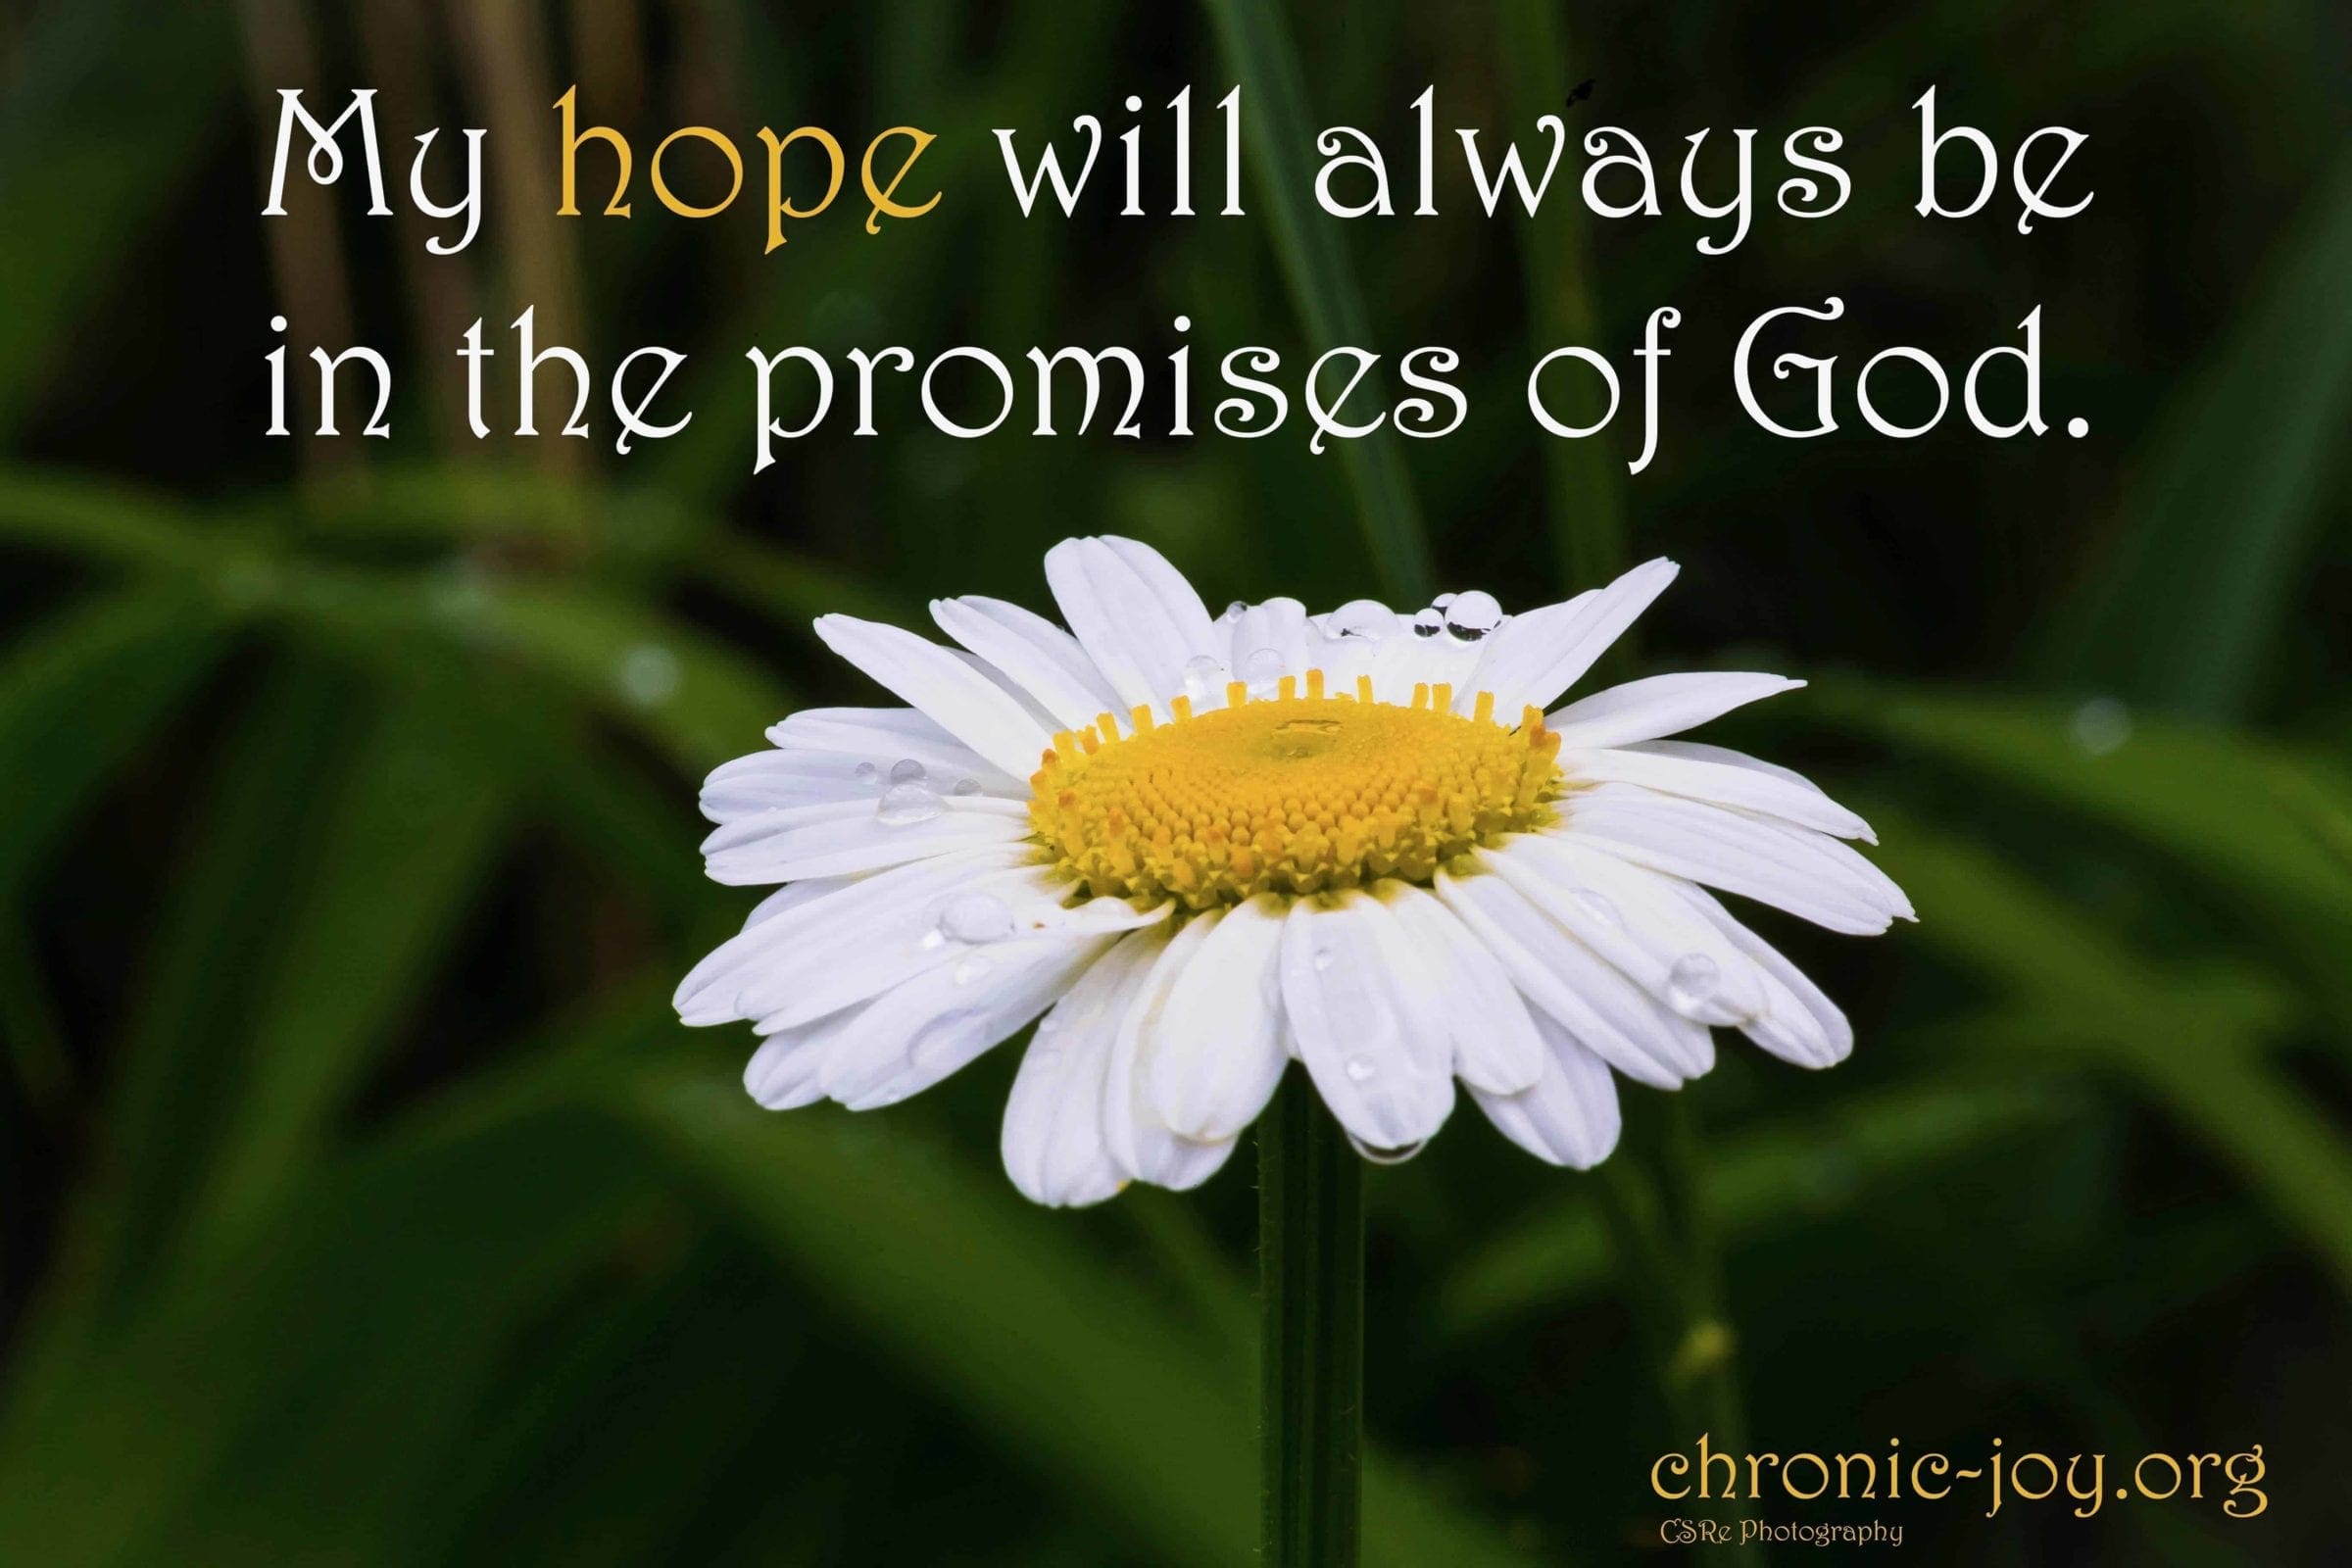 My hope will always be in the promises of God.